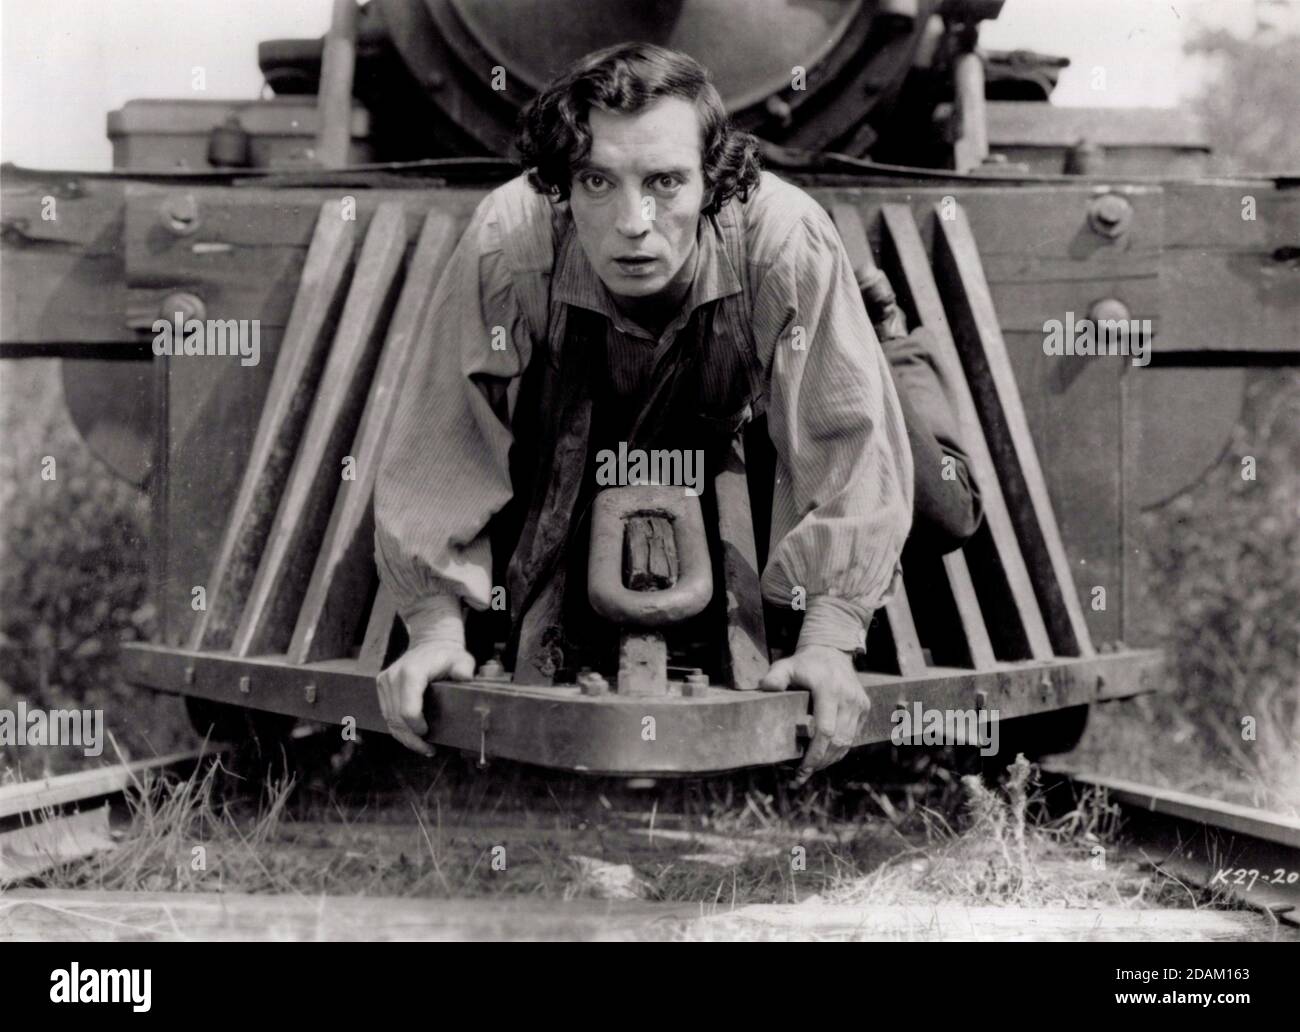 RELEASE DATE: December 31, 1926 TITLE: The General STUDIO: Buster Keaton Productions DIRECTOR: Clyde Bruckman, Buster Keaton PLOT: Southern railroad engineer Johnny Gray (Buster Keaton) facing off against Union soldiers during the American Civil War. When Johnny's fiance, Annabelle Lee (Marion Mack), is accidentally taken away while on a train stolen by Northern forces, Gray pursues the soldiers, using various modes of transportation in comic action scenes that highlight Keaton's boundless wit and dexterity. STARRING: Buster Keaton, Marion Mack, Glen Cavender. (Credit Image © Buster Keaton Pr Stock Photo